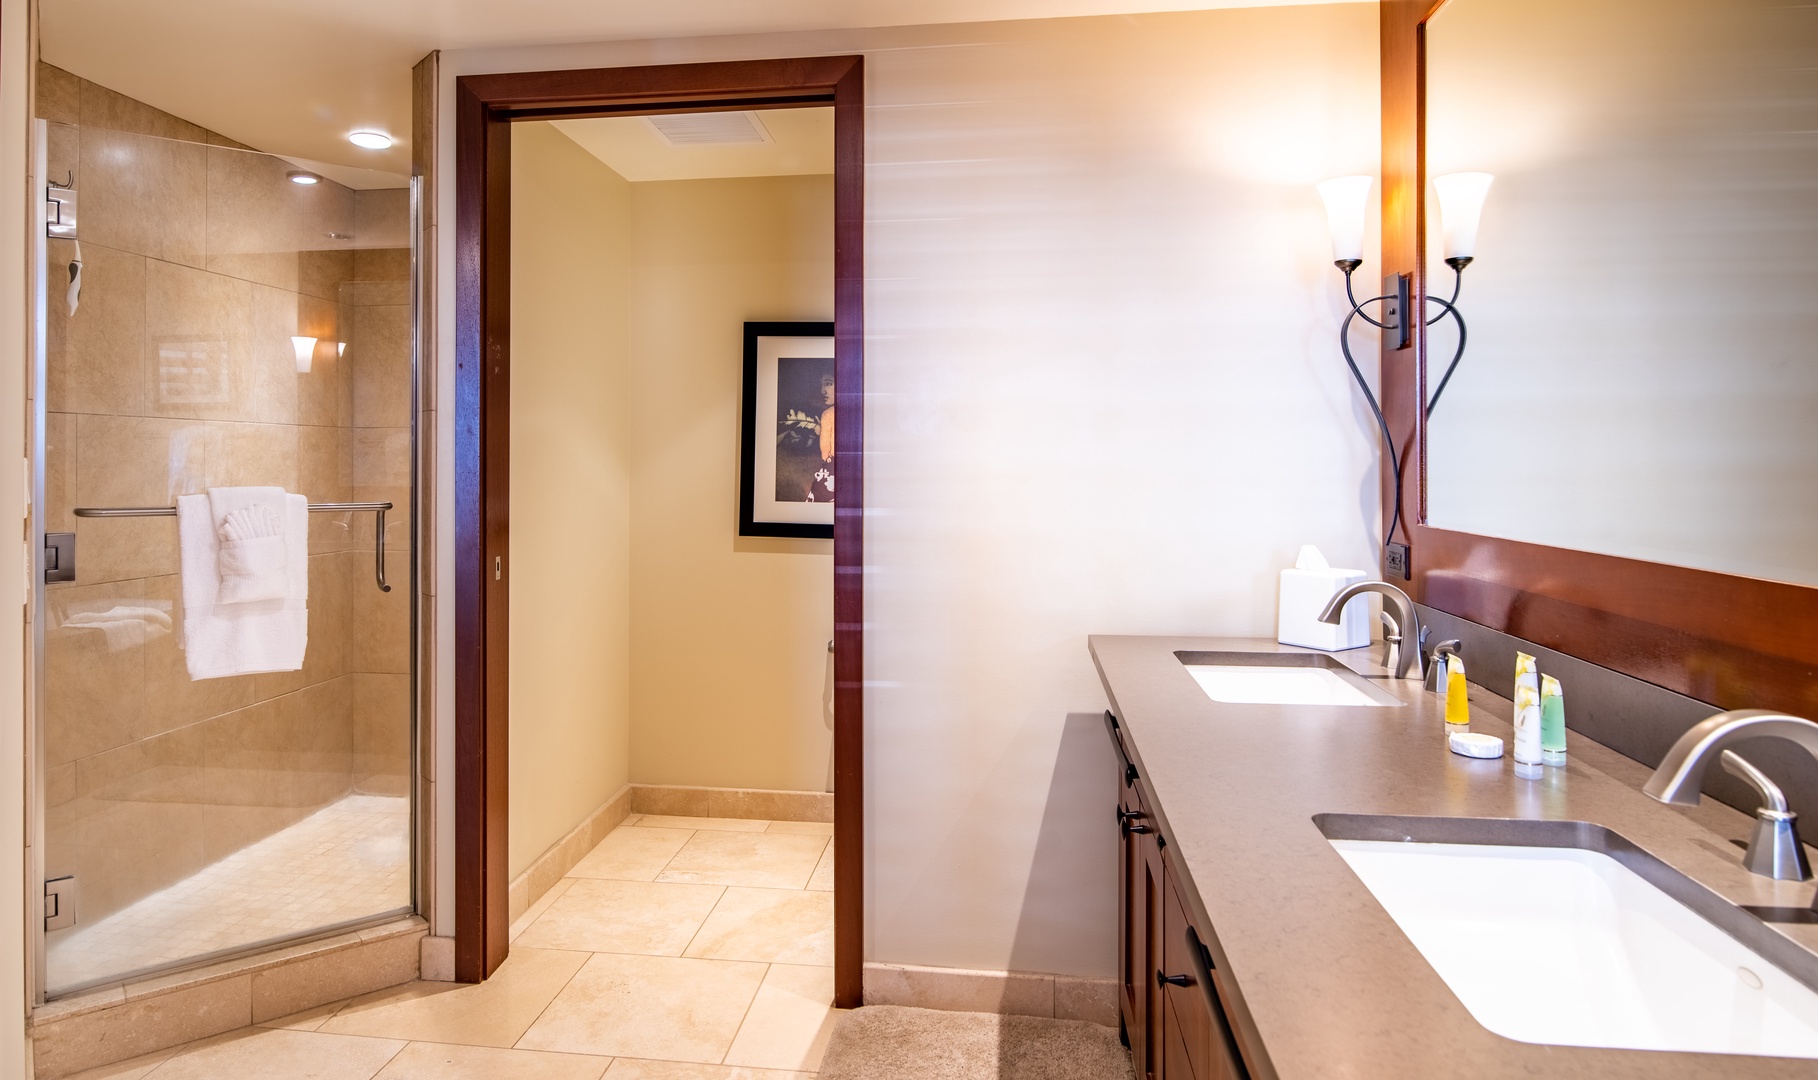 Kapolei Vacation Rentals, Ko Olina Beach Villas B301 - The spacious primary guest bathroom with a walk-in shower.